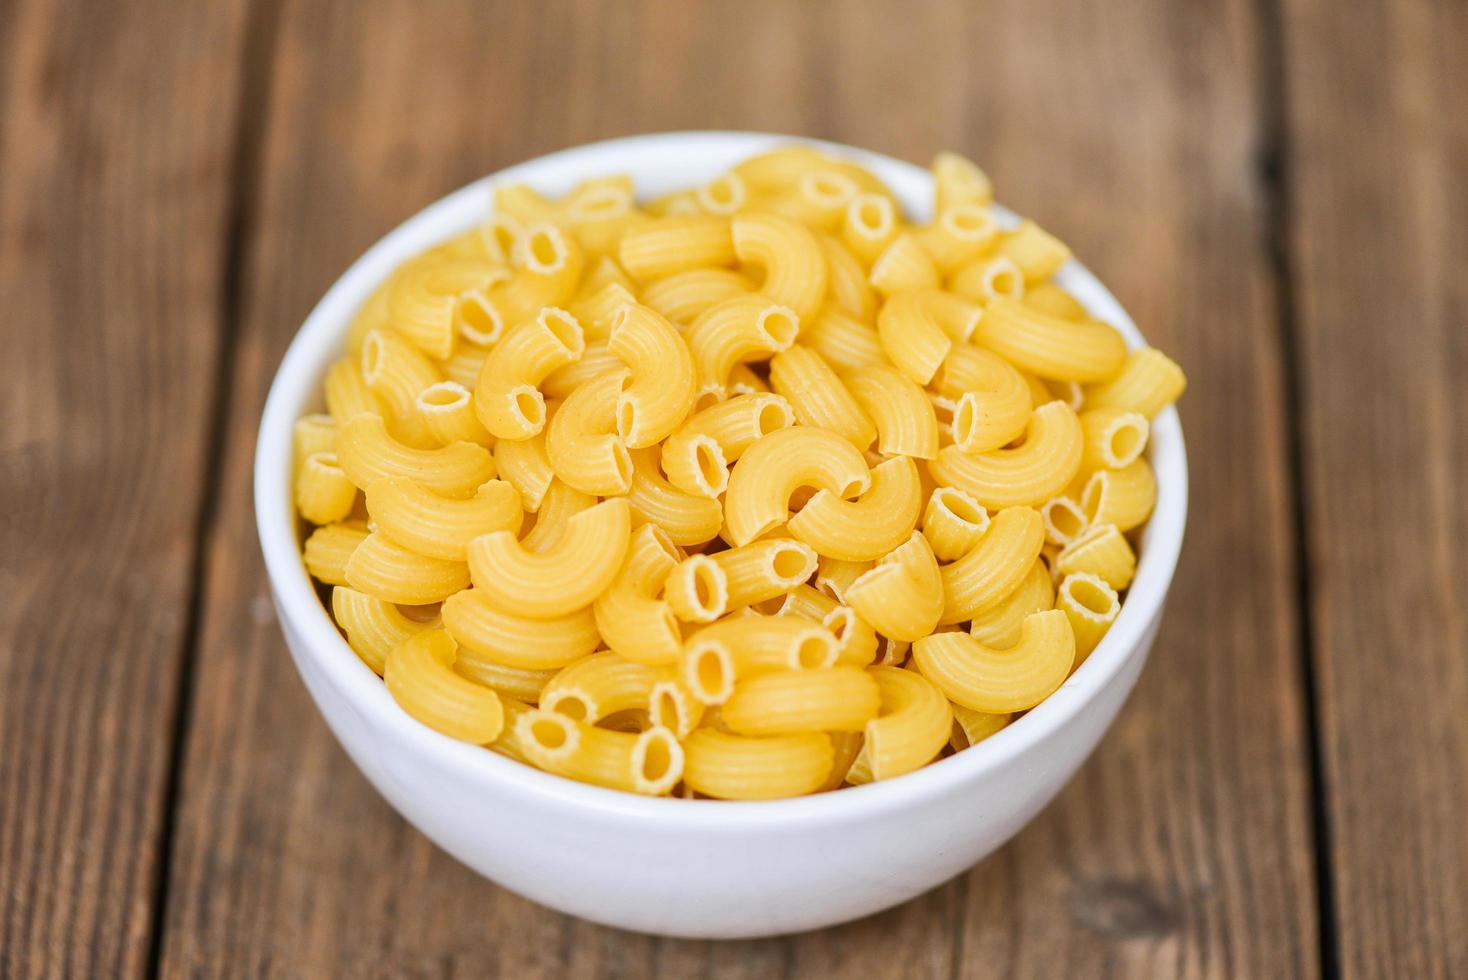 macaroni top view on bowl and wooden background - close up raw macaroni uncooked delicious pasta or penne noodles photo